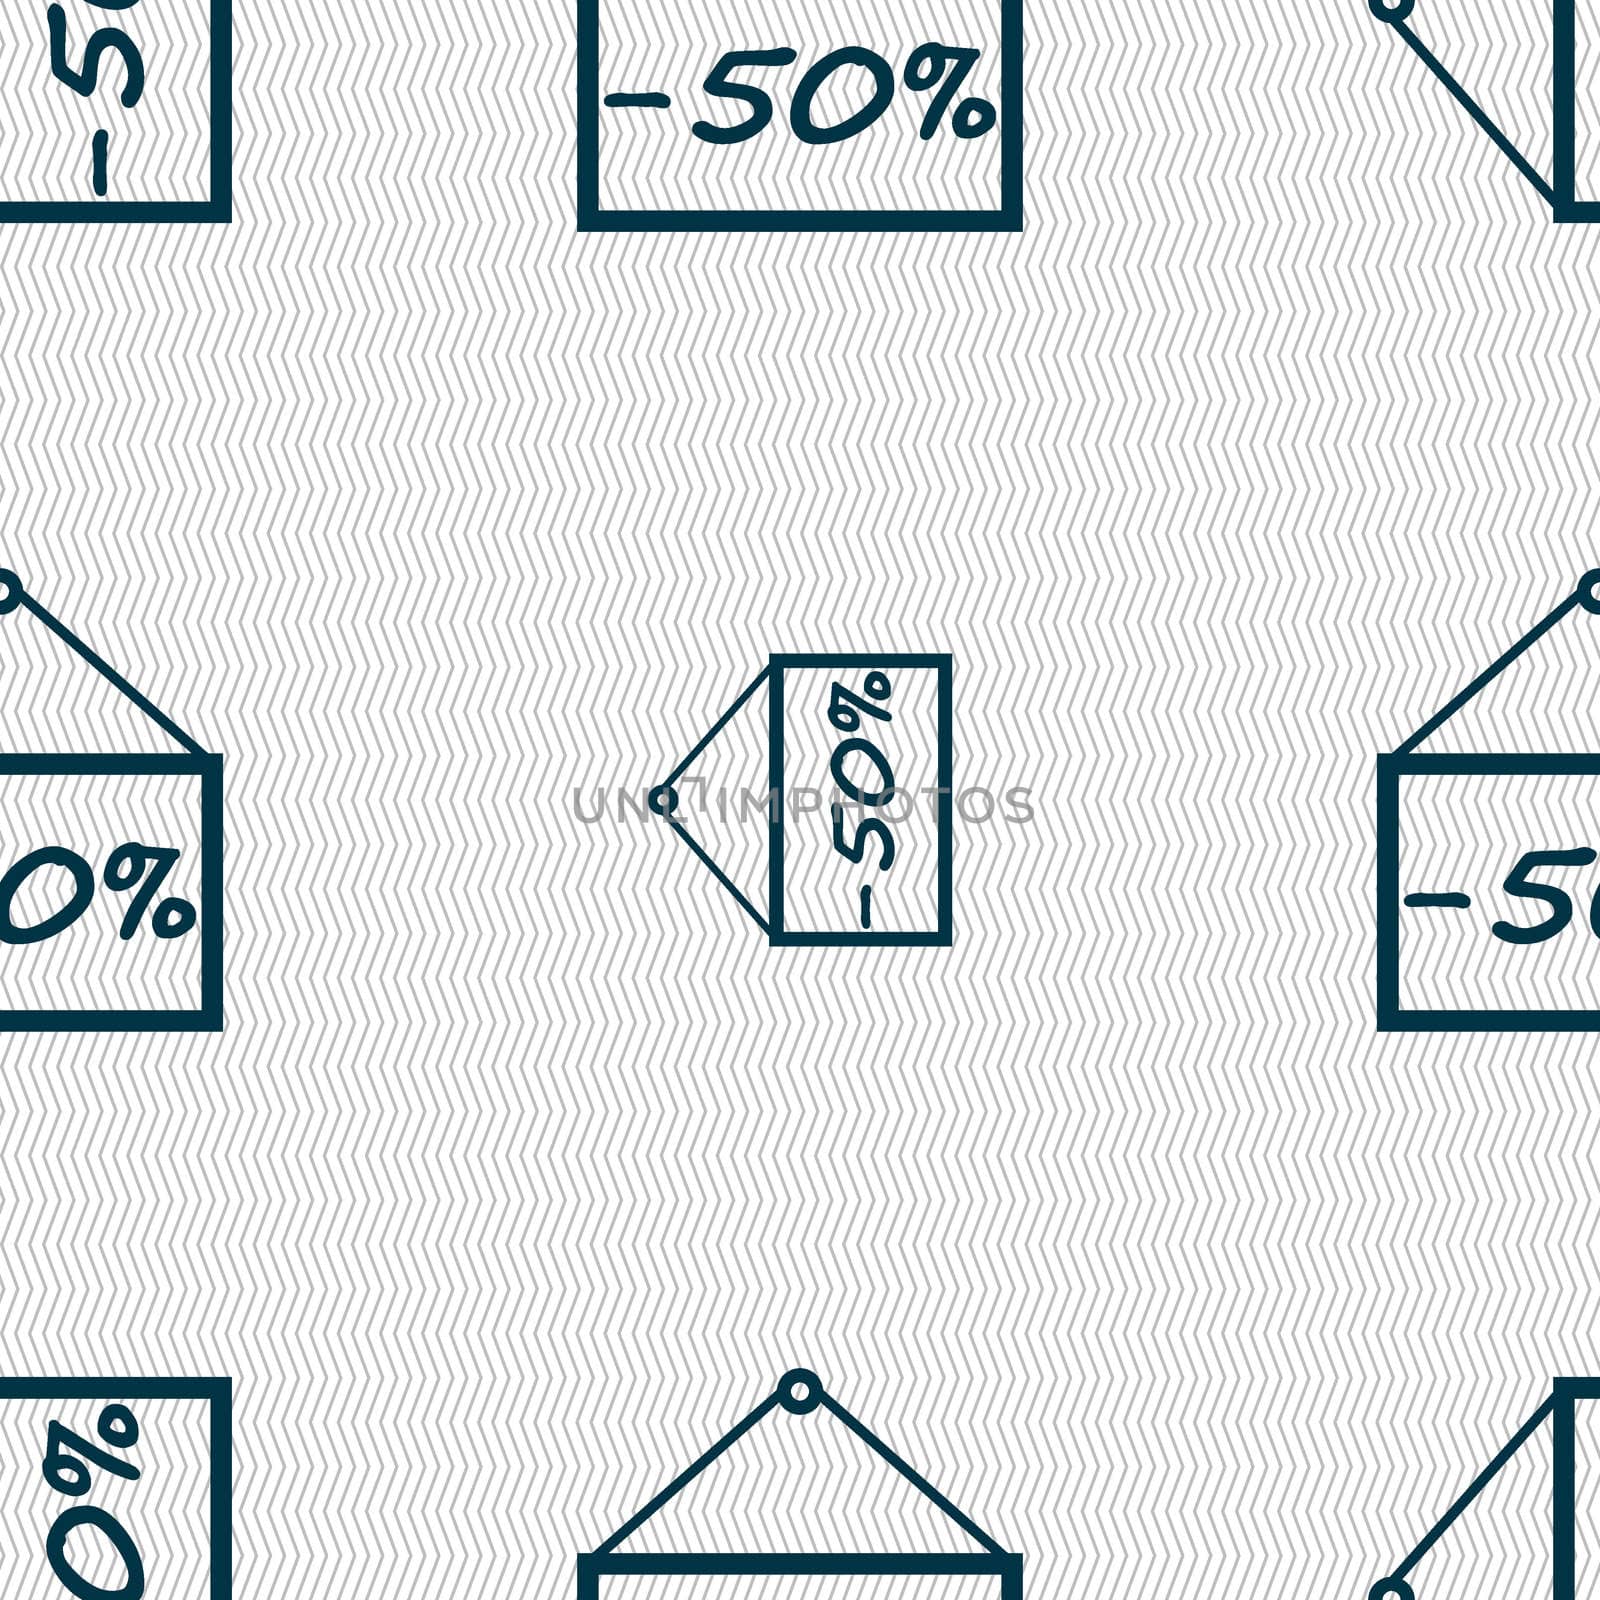 50 discount icon sign. Seamless abstract background with geometric shapes. illustration